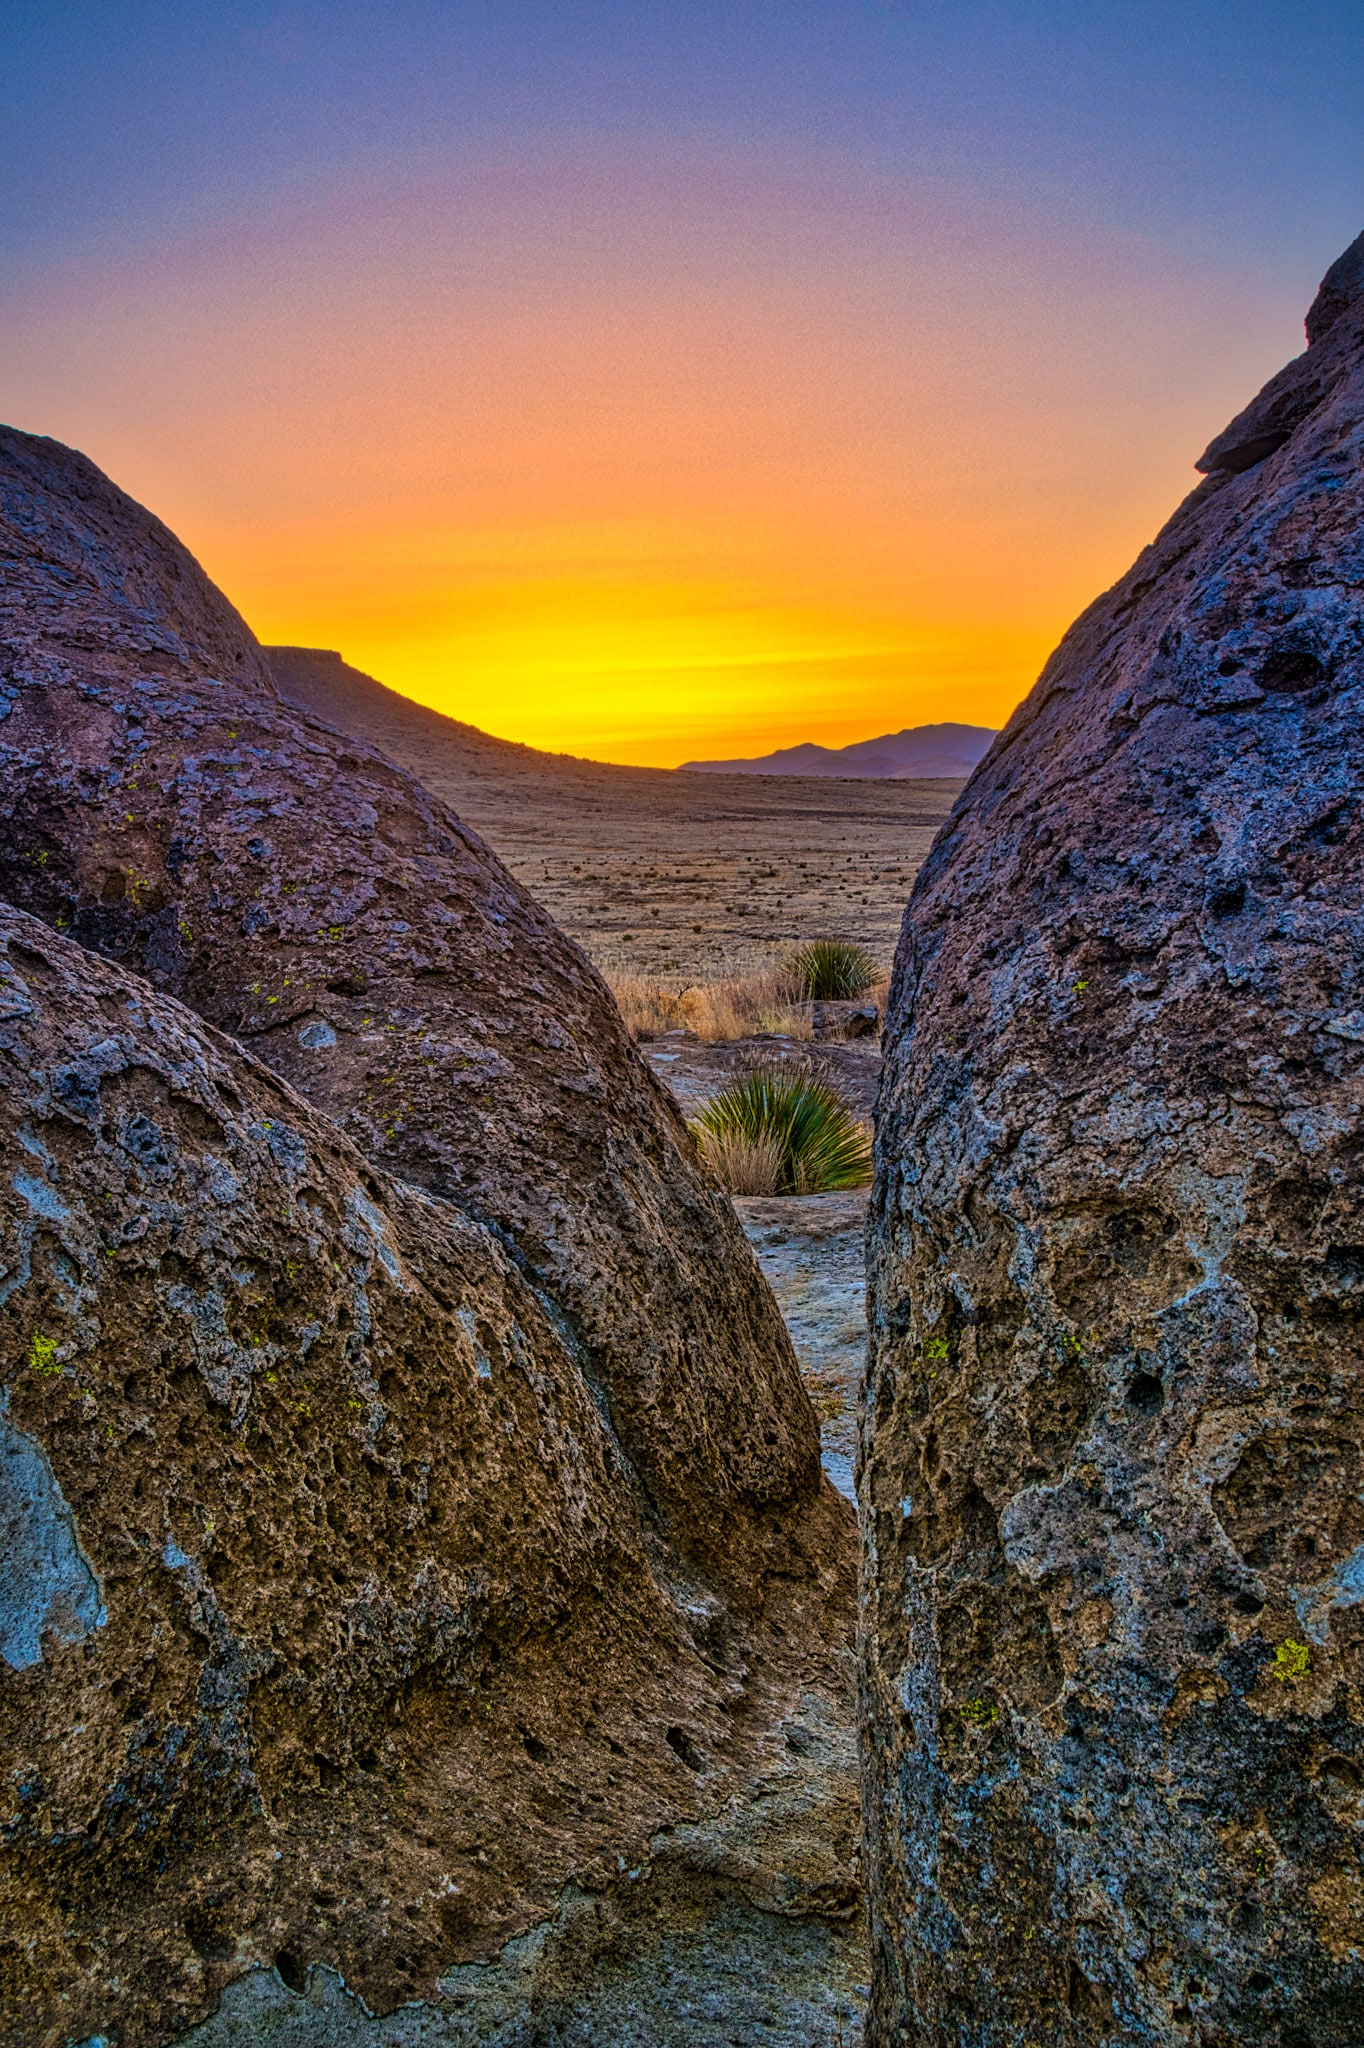 A dramatic sunset view taken through the eroded tuff pinnacles of City of Rocks State Park in New Mexico.